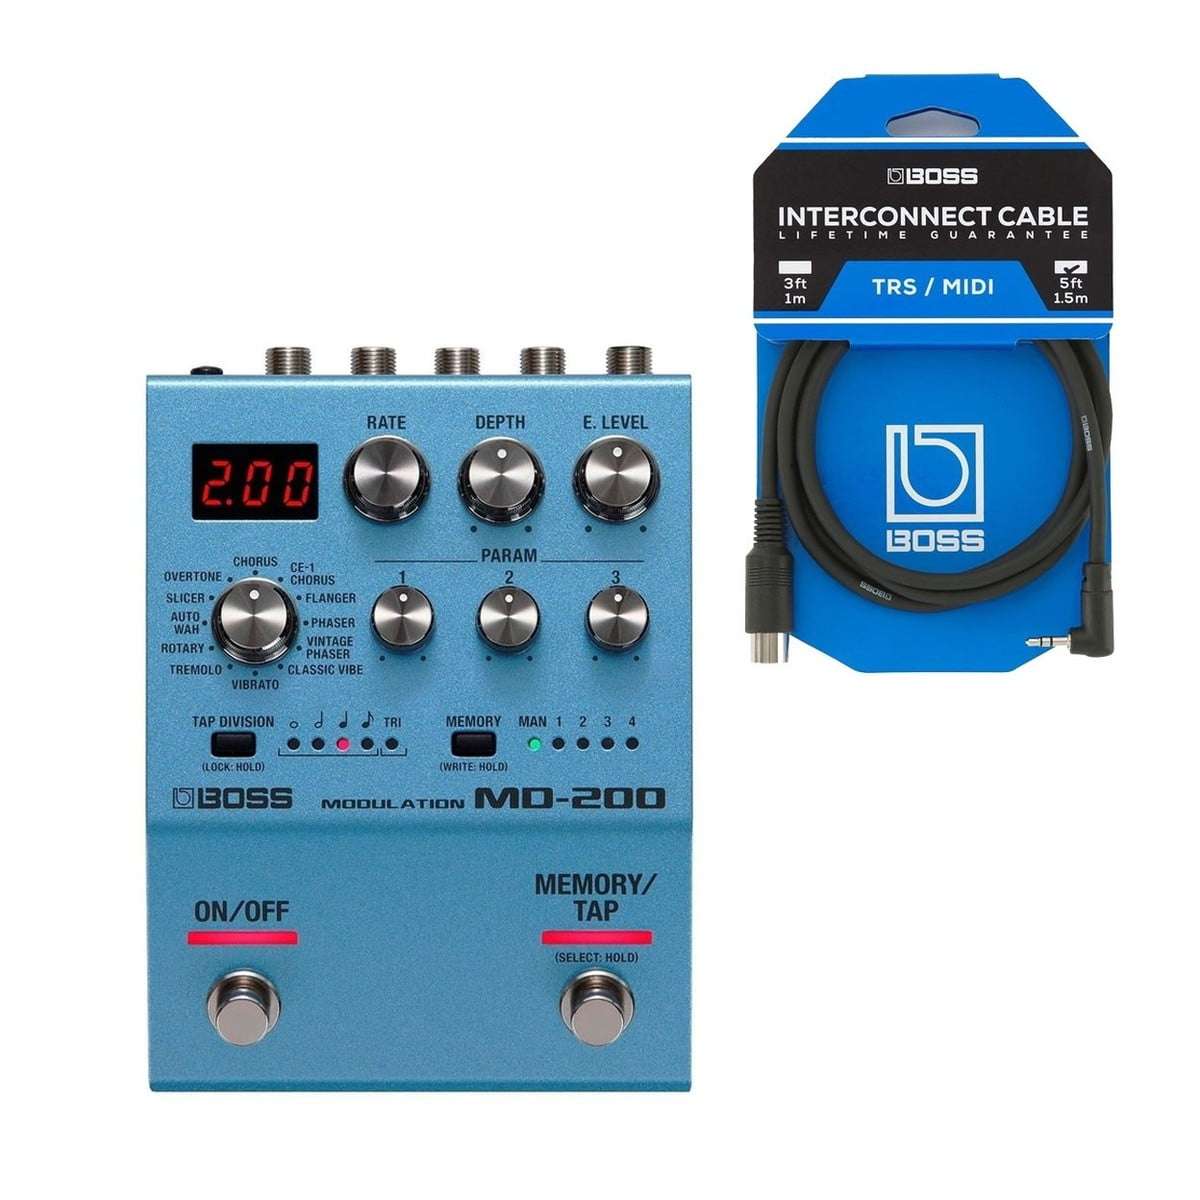 Boss MD-200 Modulation Pedal with MIDI Connection Cable - New Boss            Modulation        Chorus Boost   Guitar Effect Pedal